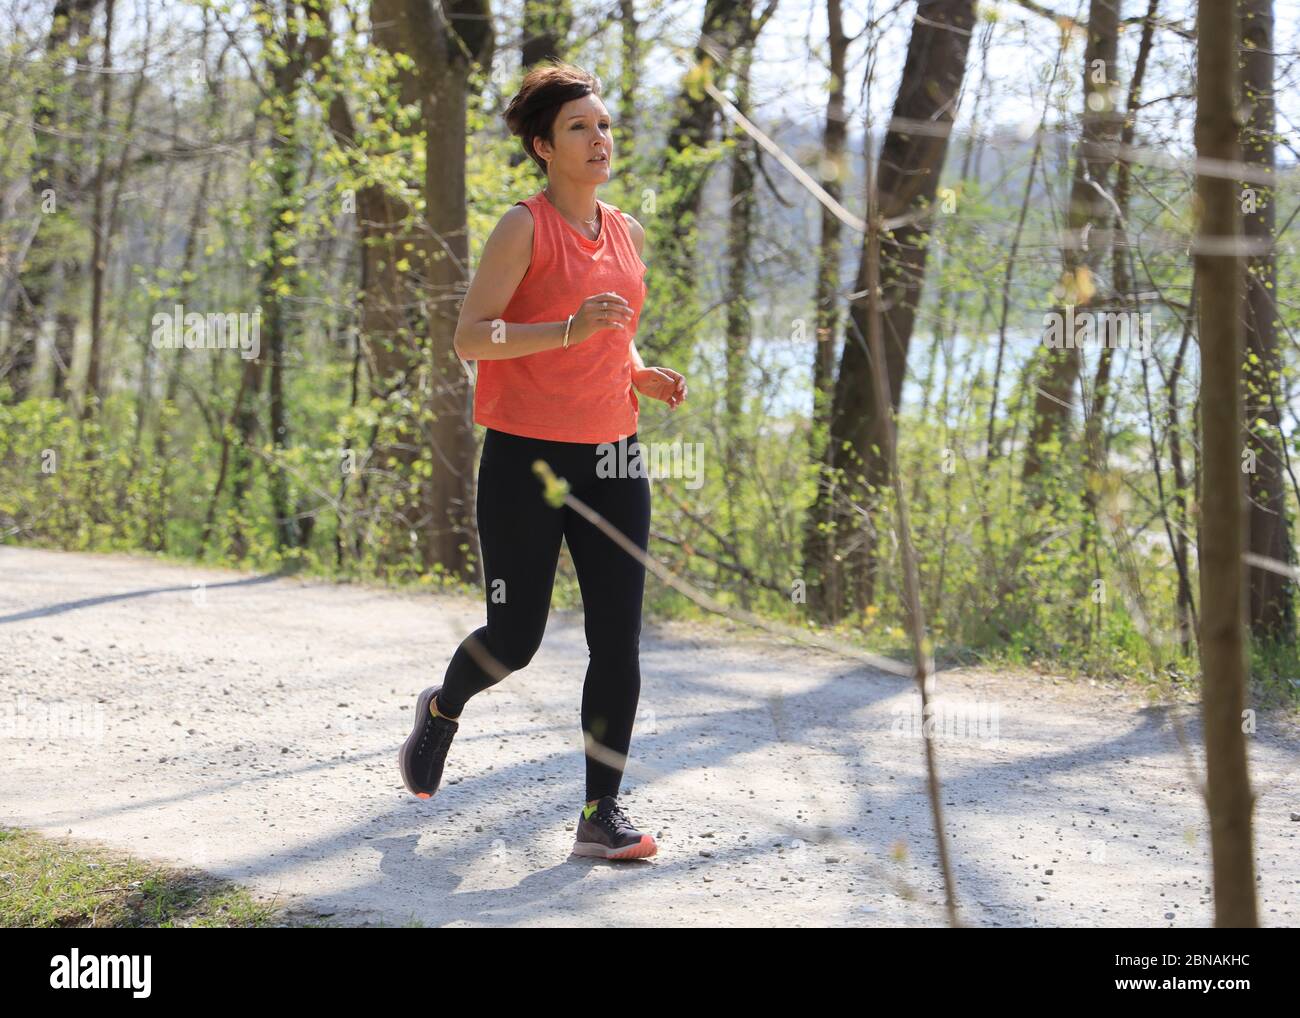 Woman, 40-45 years old, jogging in a forest area in Munich, Bavaria, Germany. Stock Photo